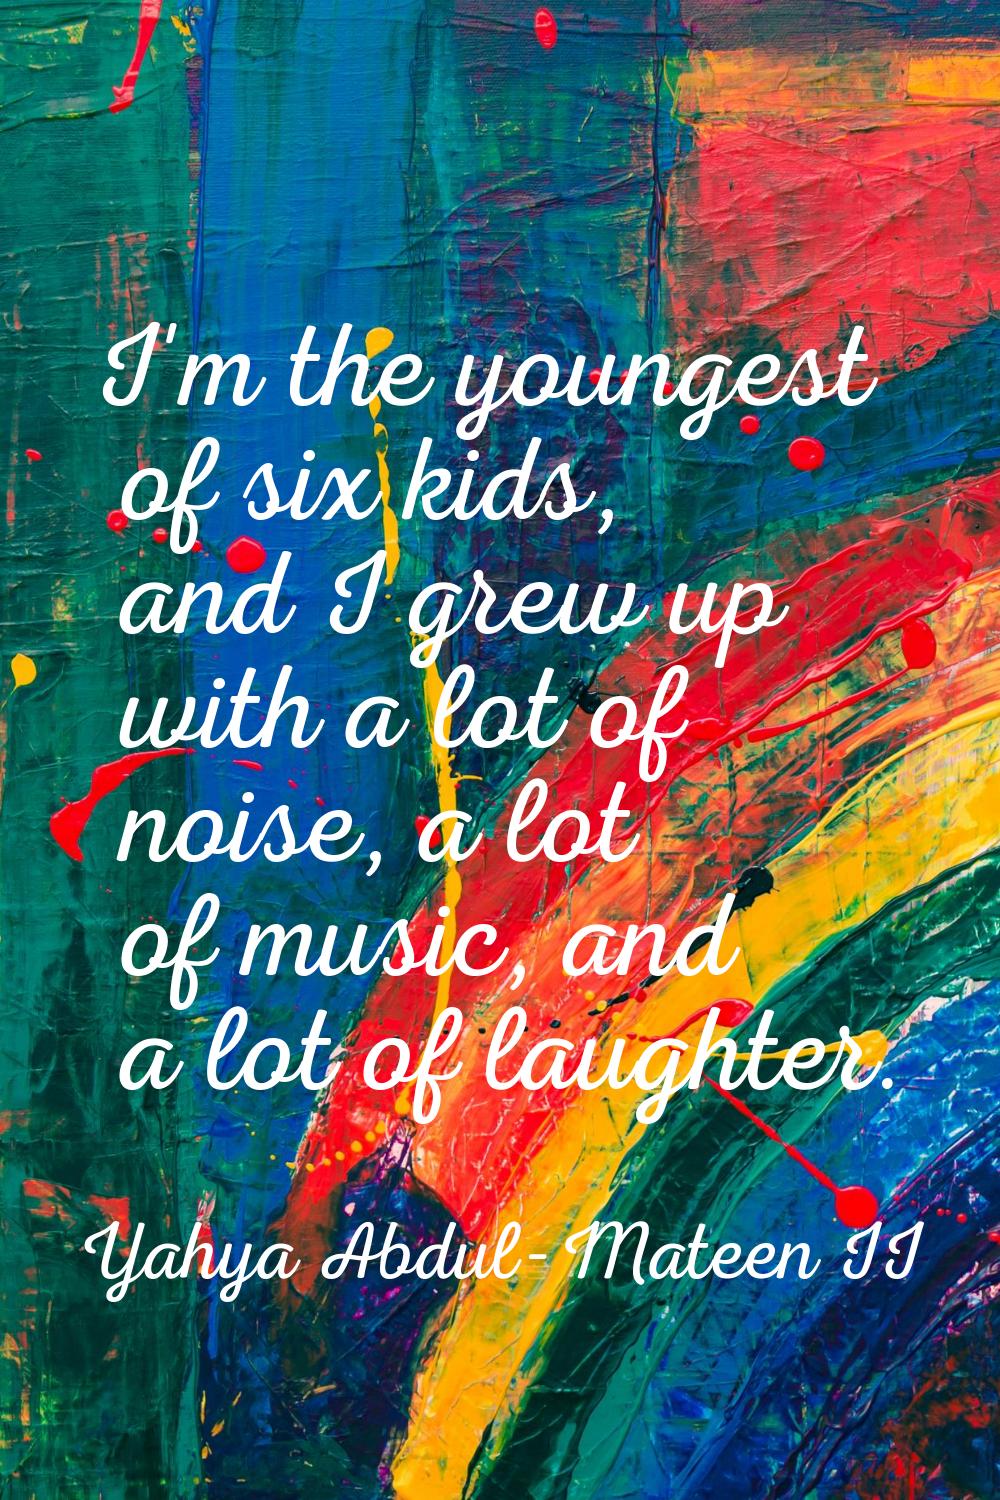 I'm the youngest of six kids, and I grew up with a lot of noise, a lot of music, and a lot of laugh